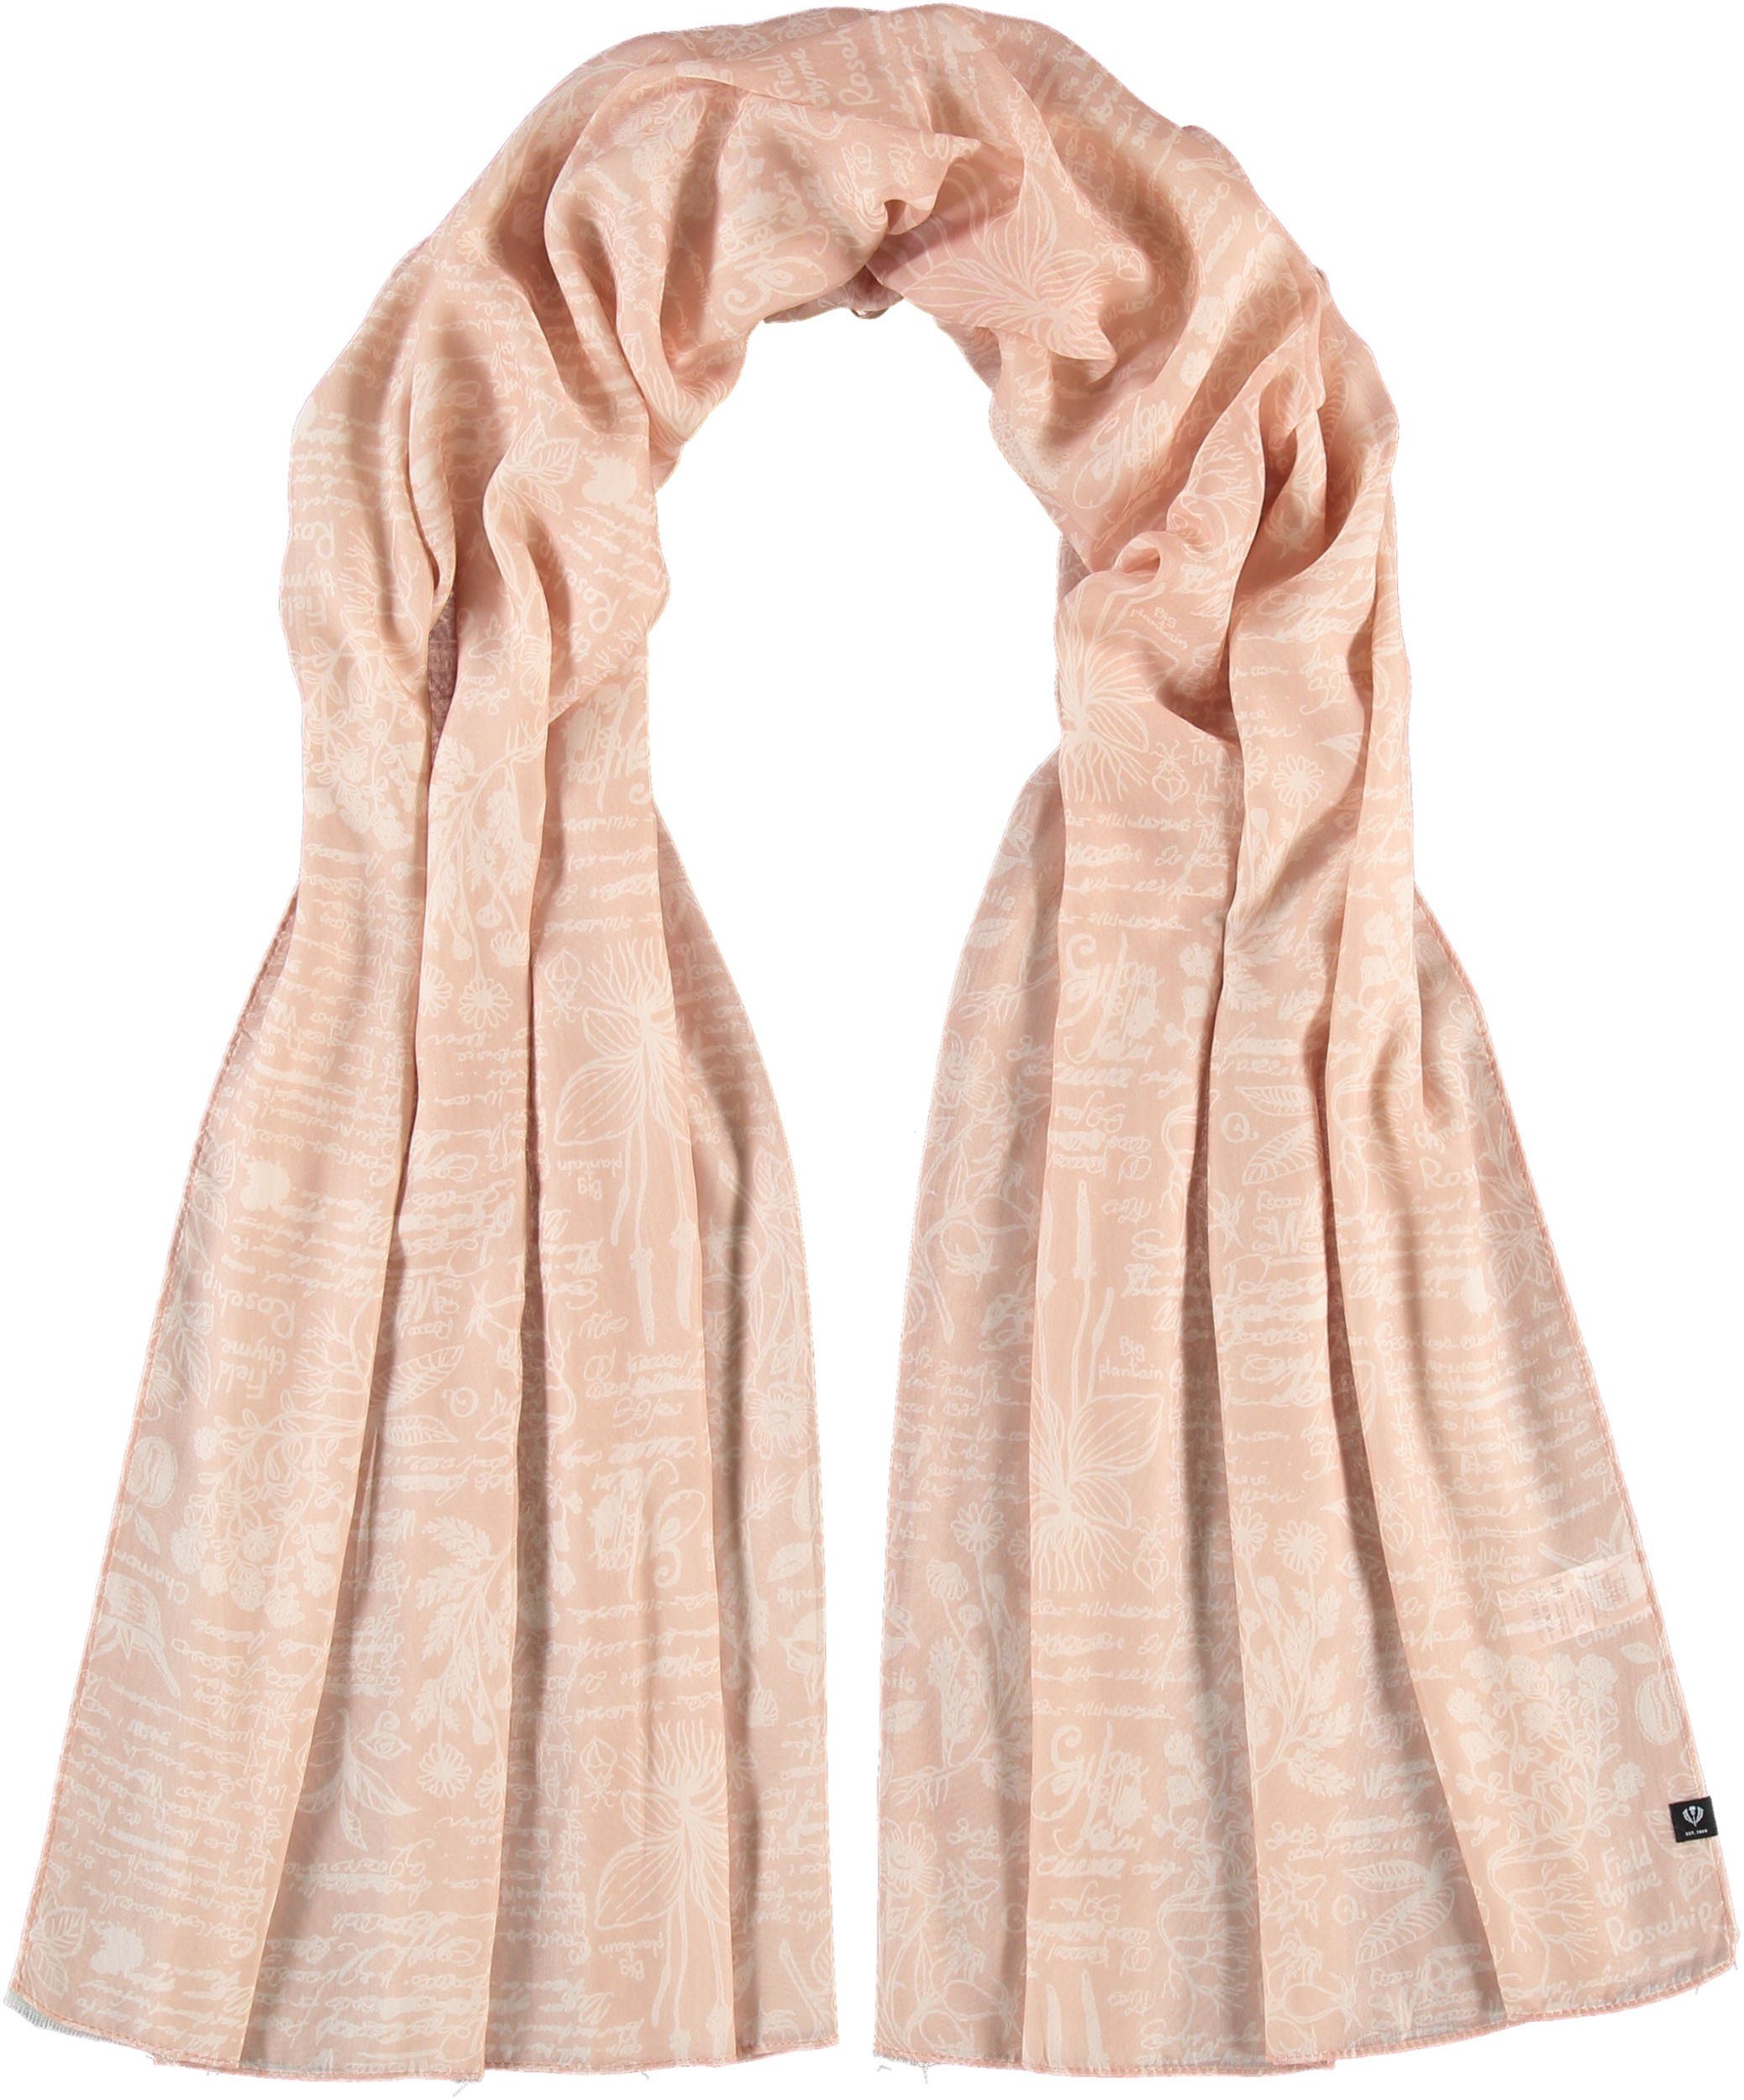 Fraas XXL-Schal Polyesterstola, (1-St) dusty rose